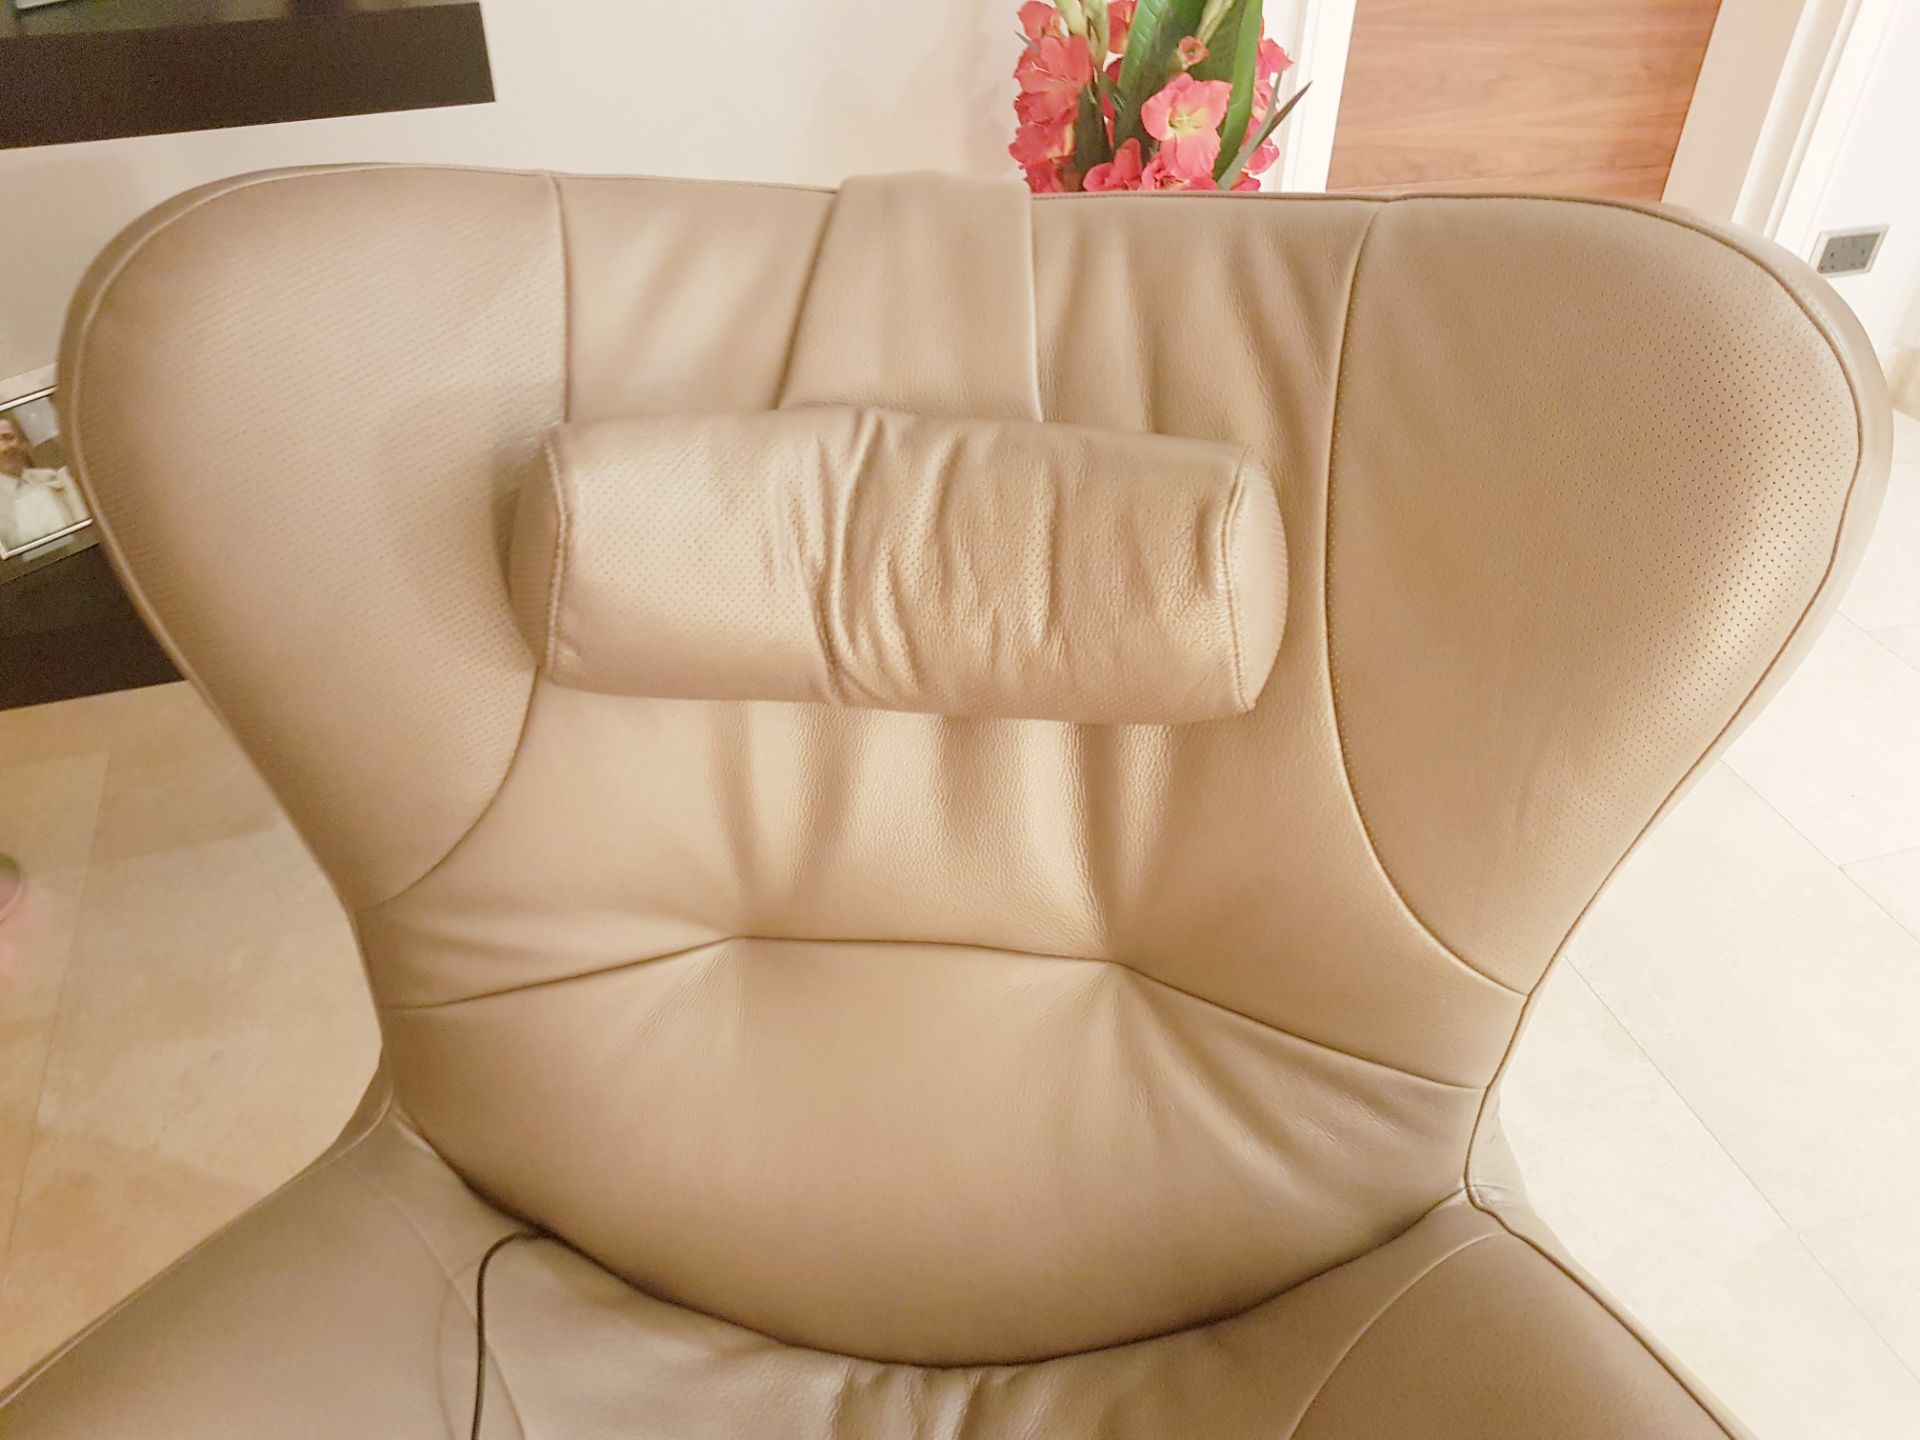 1 x Natuzzi Leather Upholstered Swivel Chair With In-built Speakers - Ref: MT643 - Stunning Chair In - Image 2 of 5